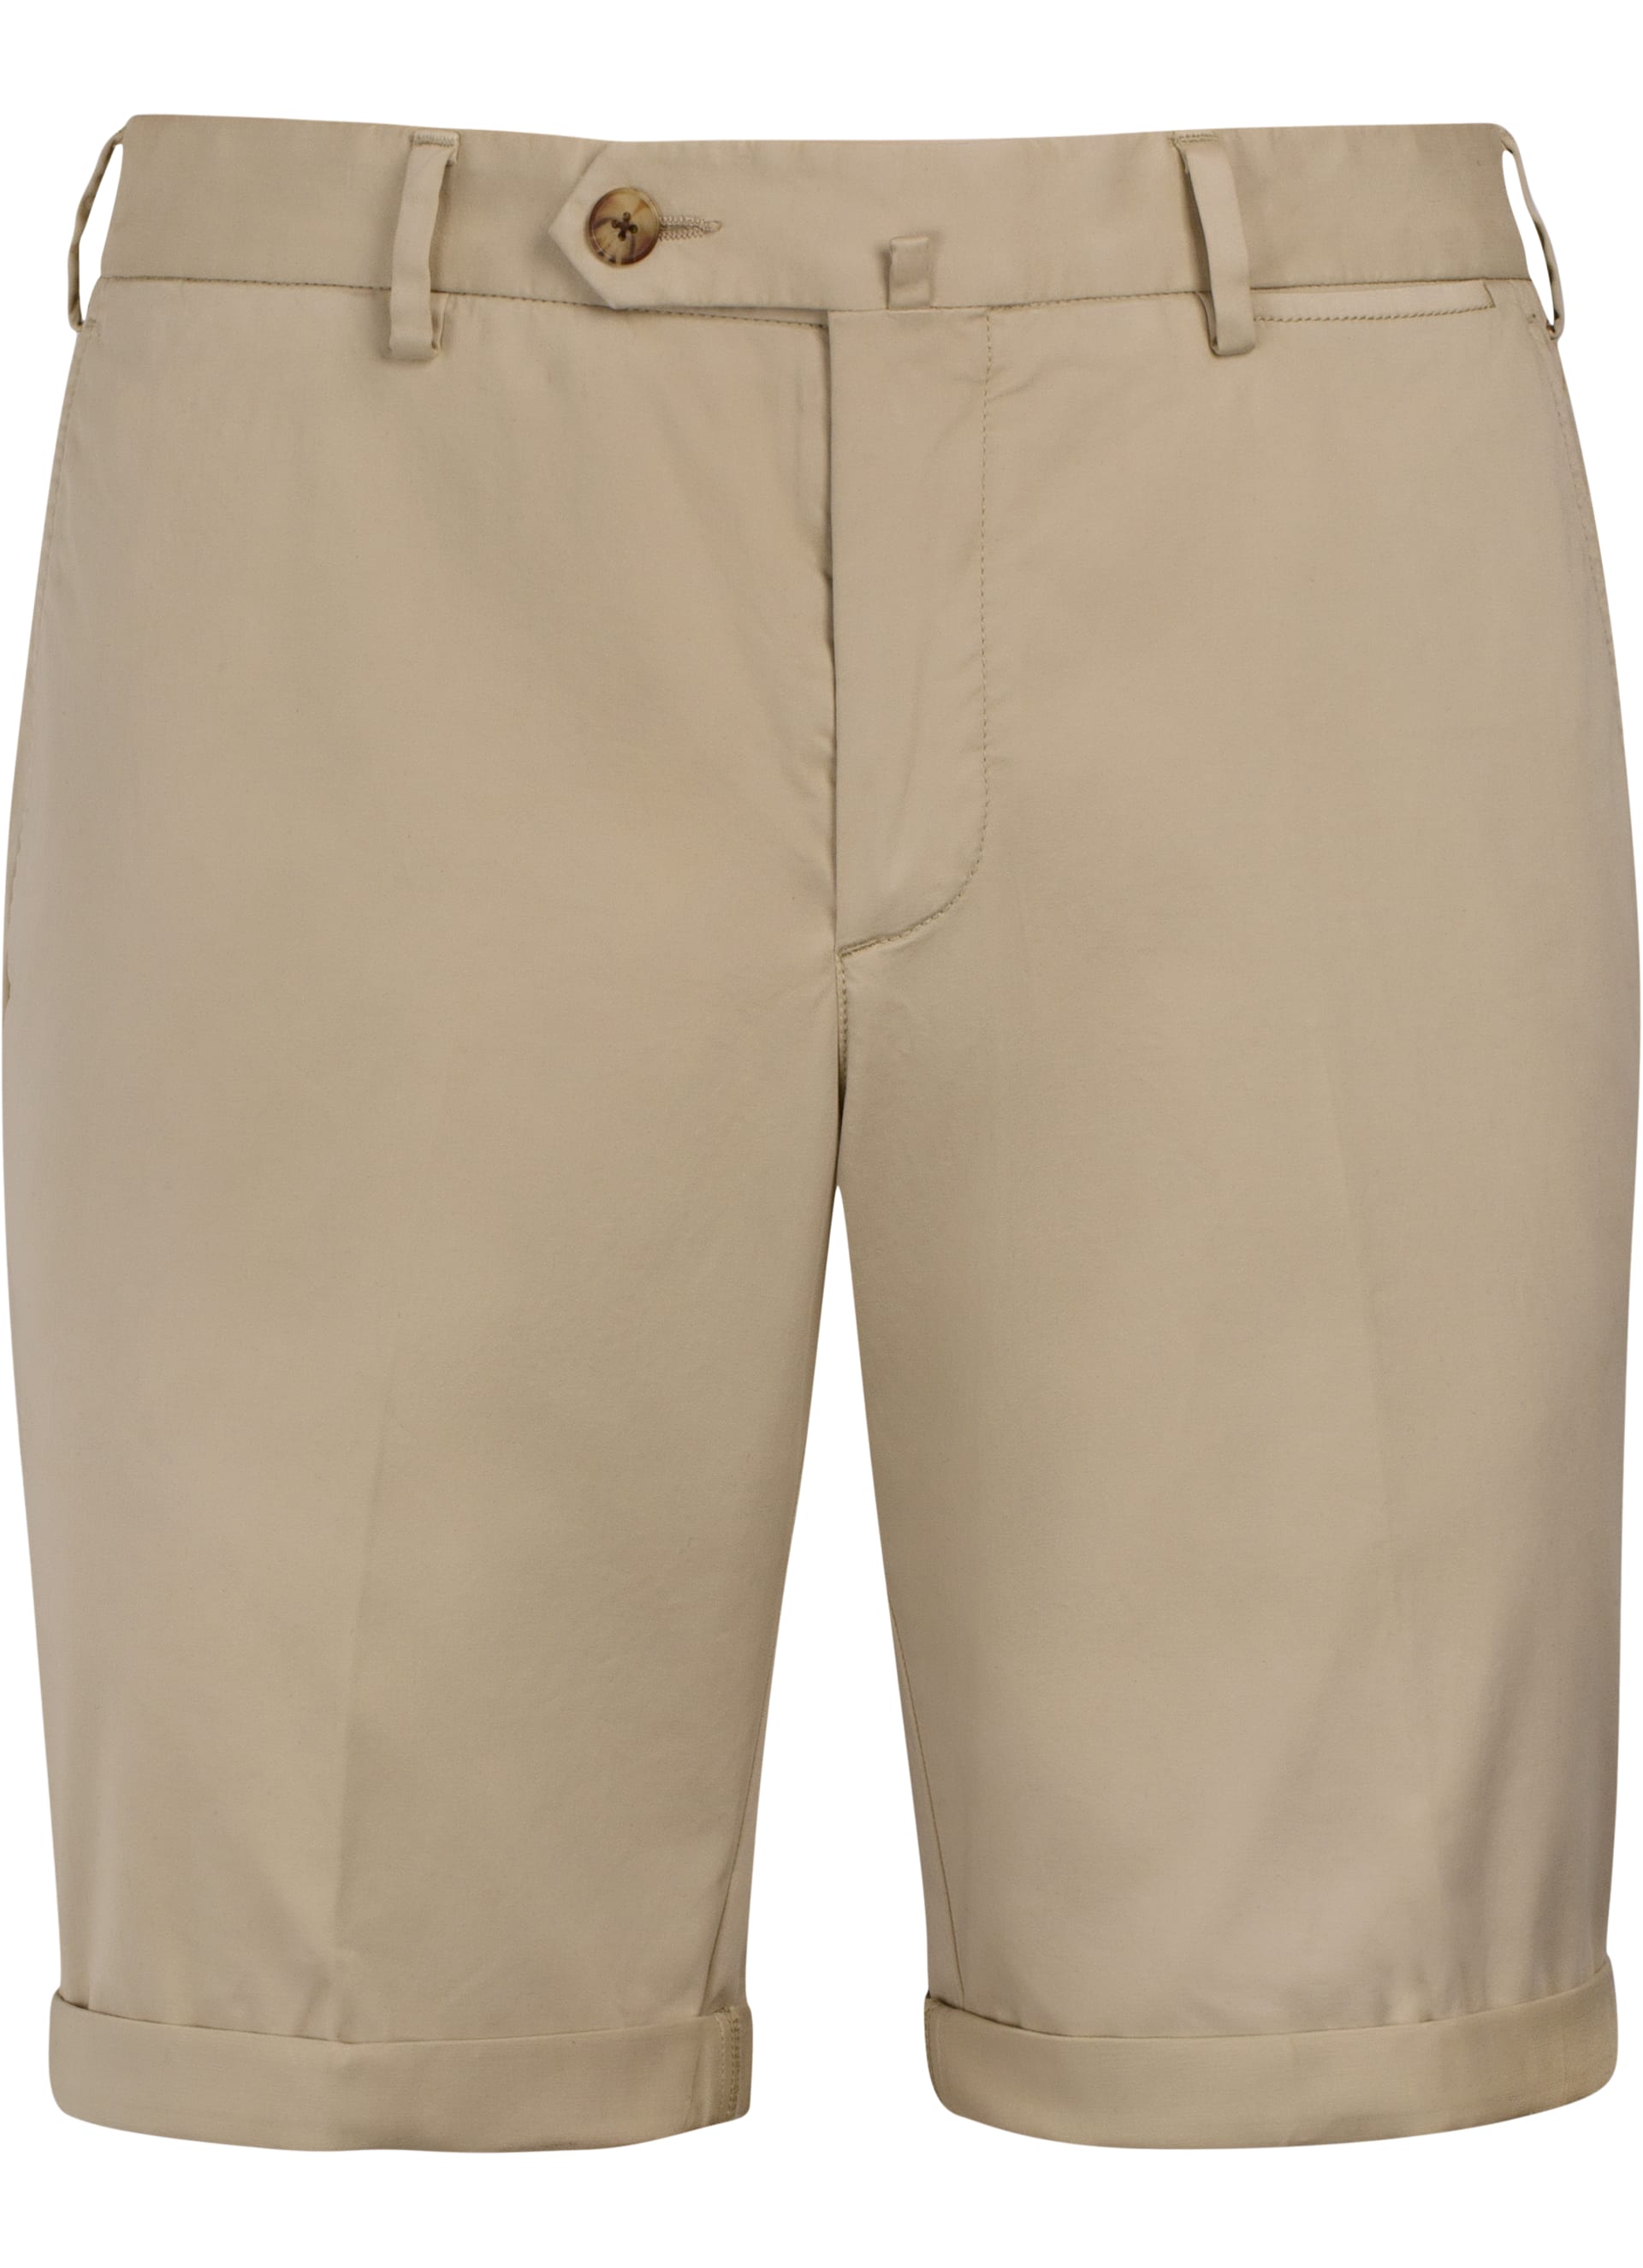 Sand Shorts B1013i | Suitsupply Online Store